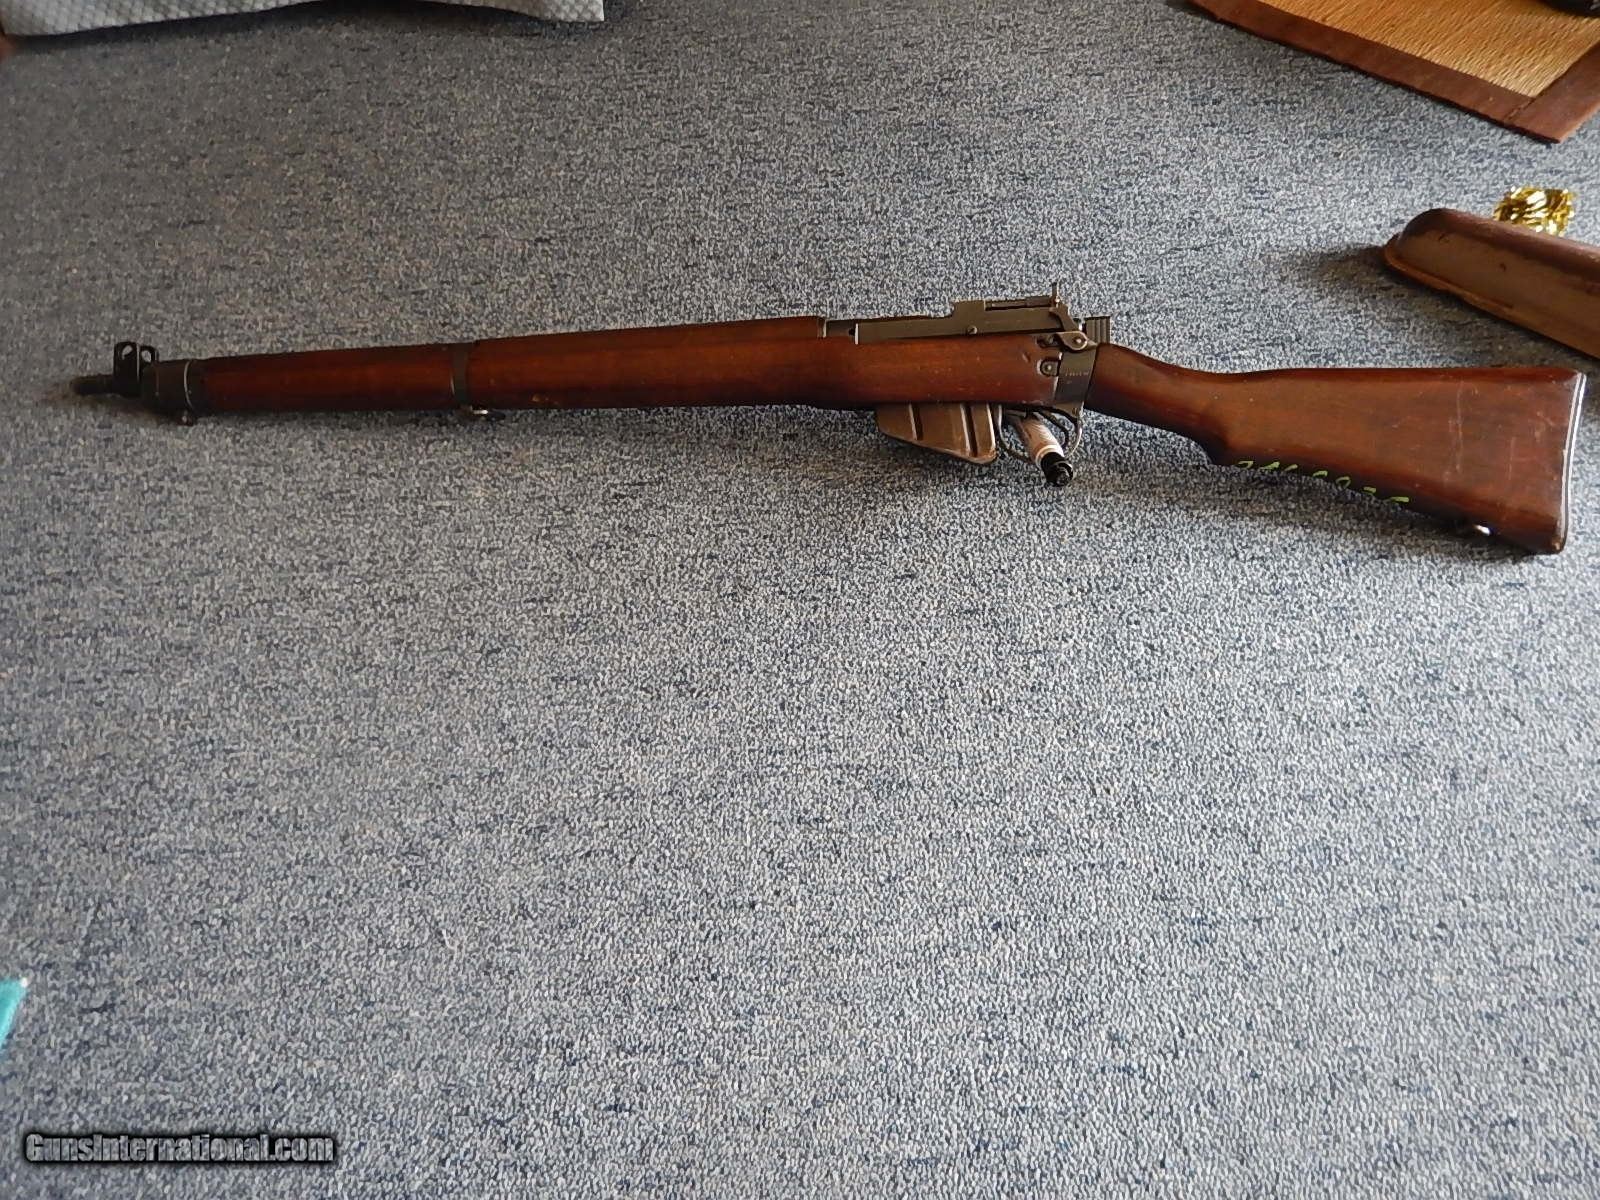 Canadian Long Branch No. 4 Mks 1* Enfield, .303 British for sale